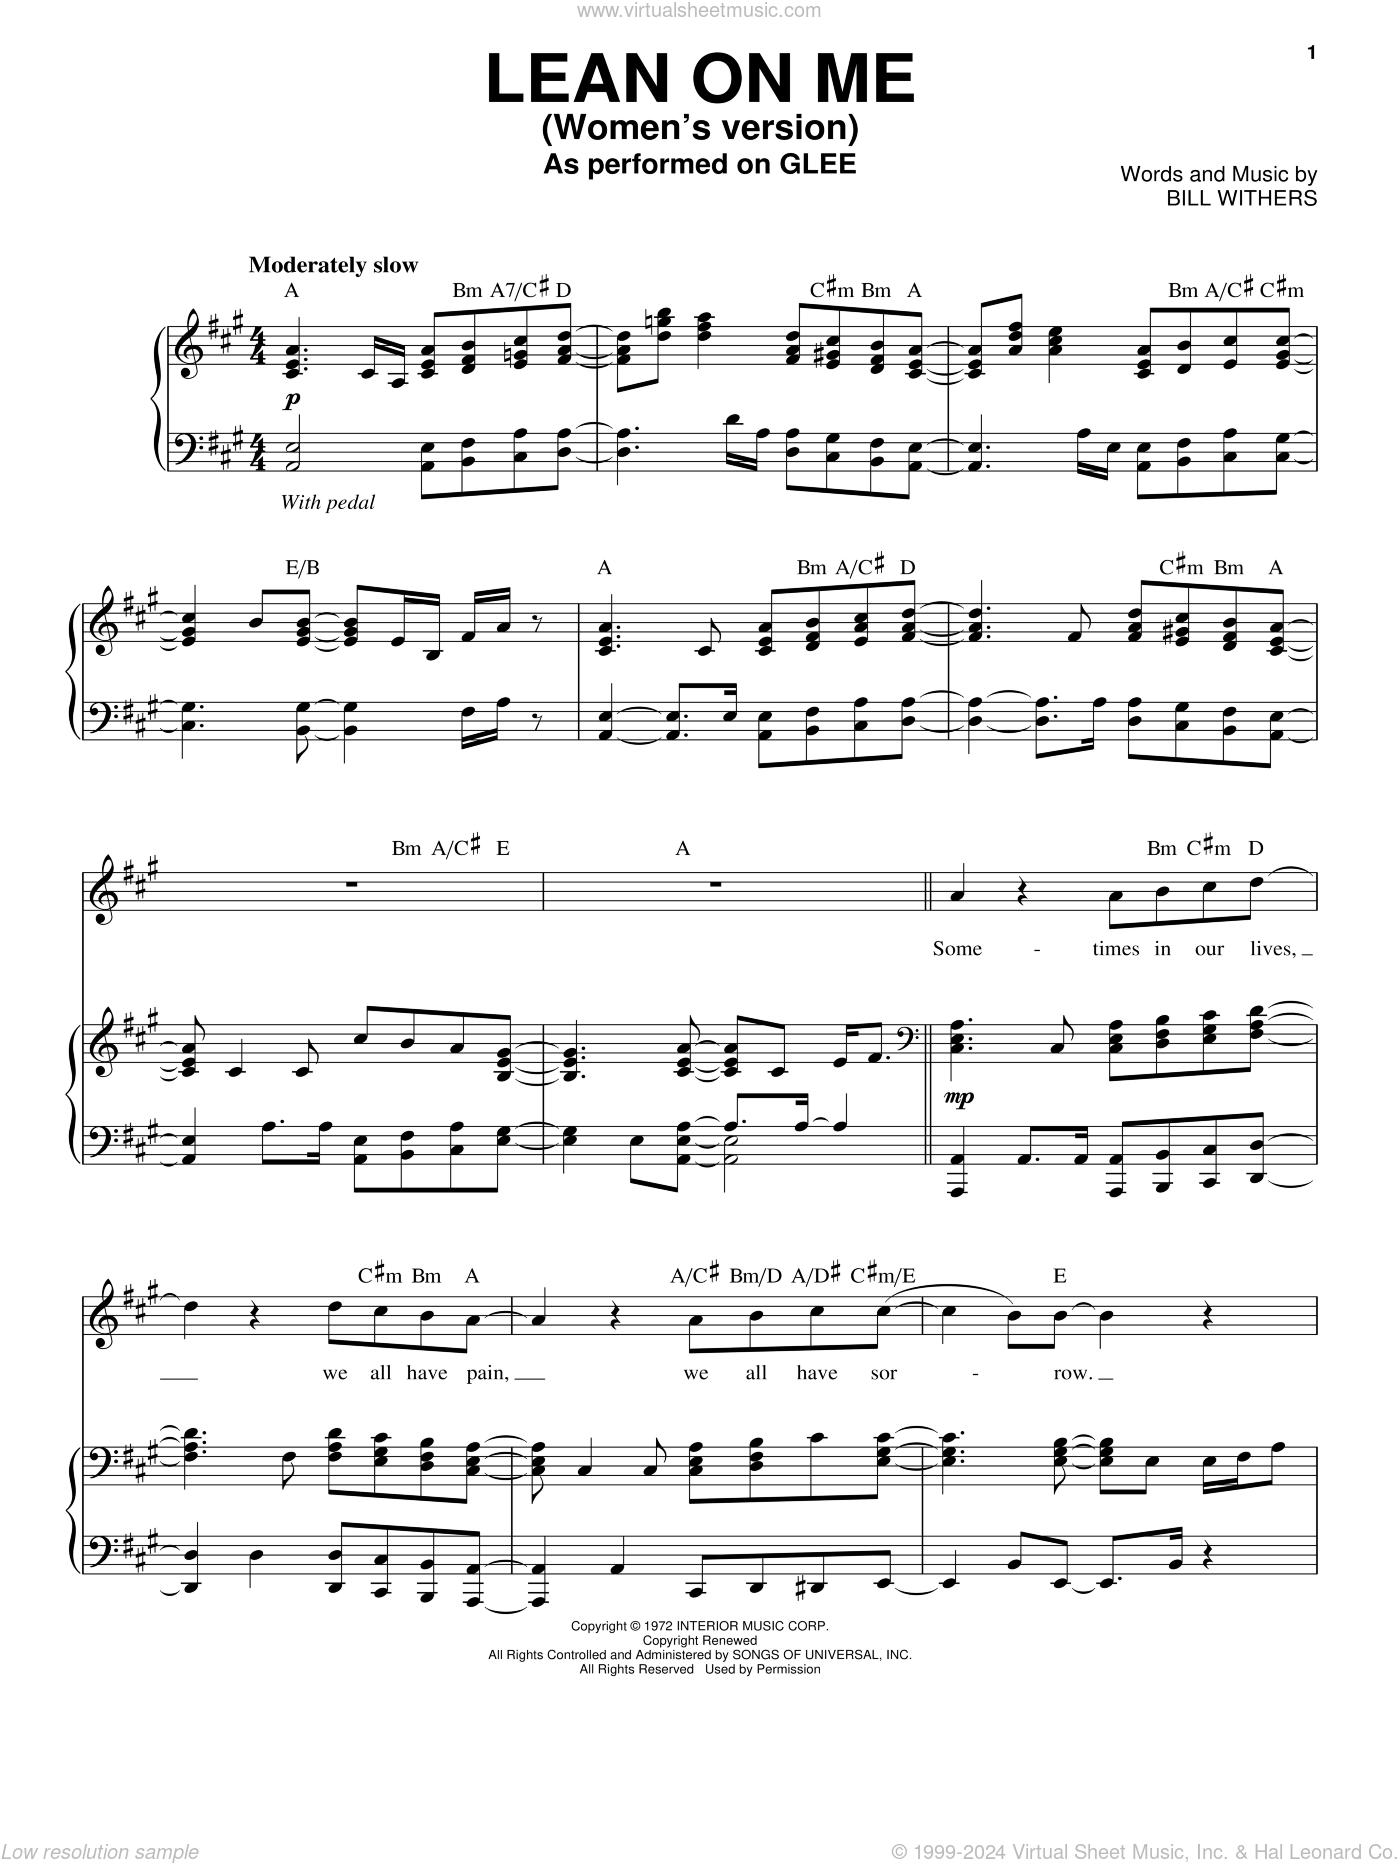 Cast - Lean On Me sheet music for voice and piano [PDF]